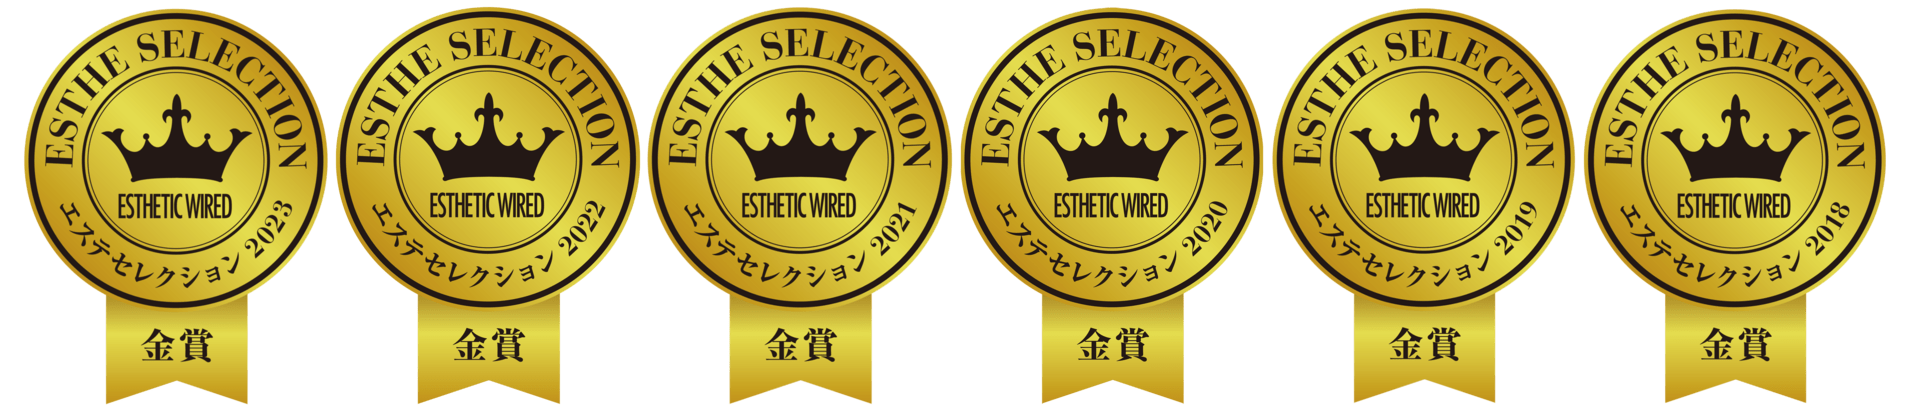 esthe selection6years